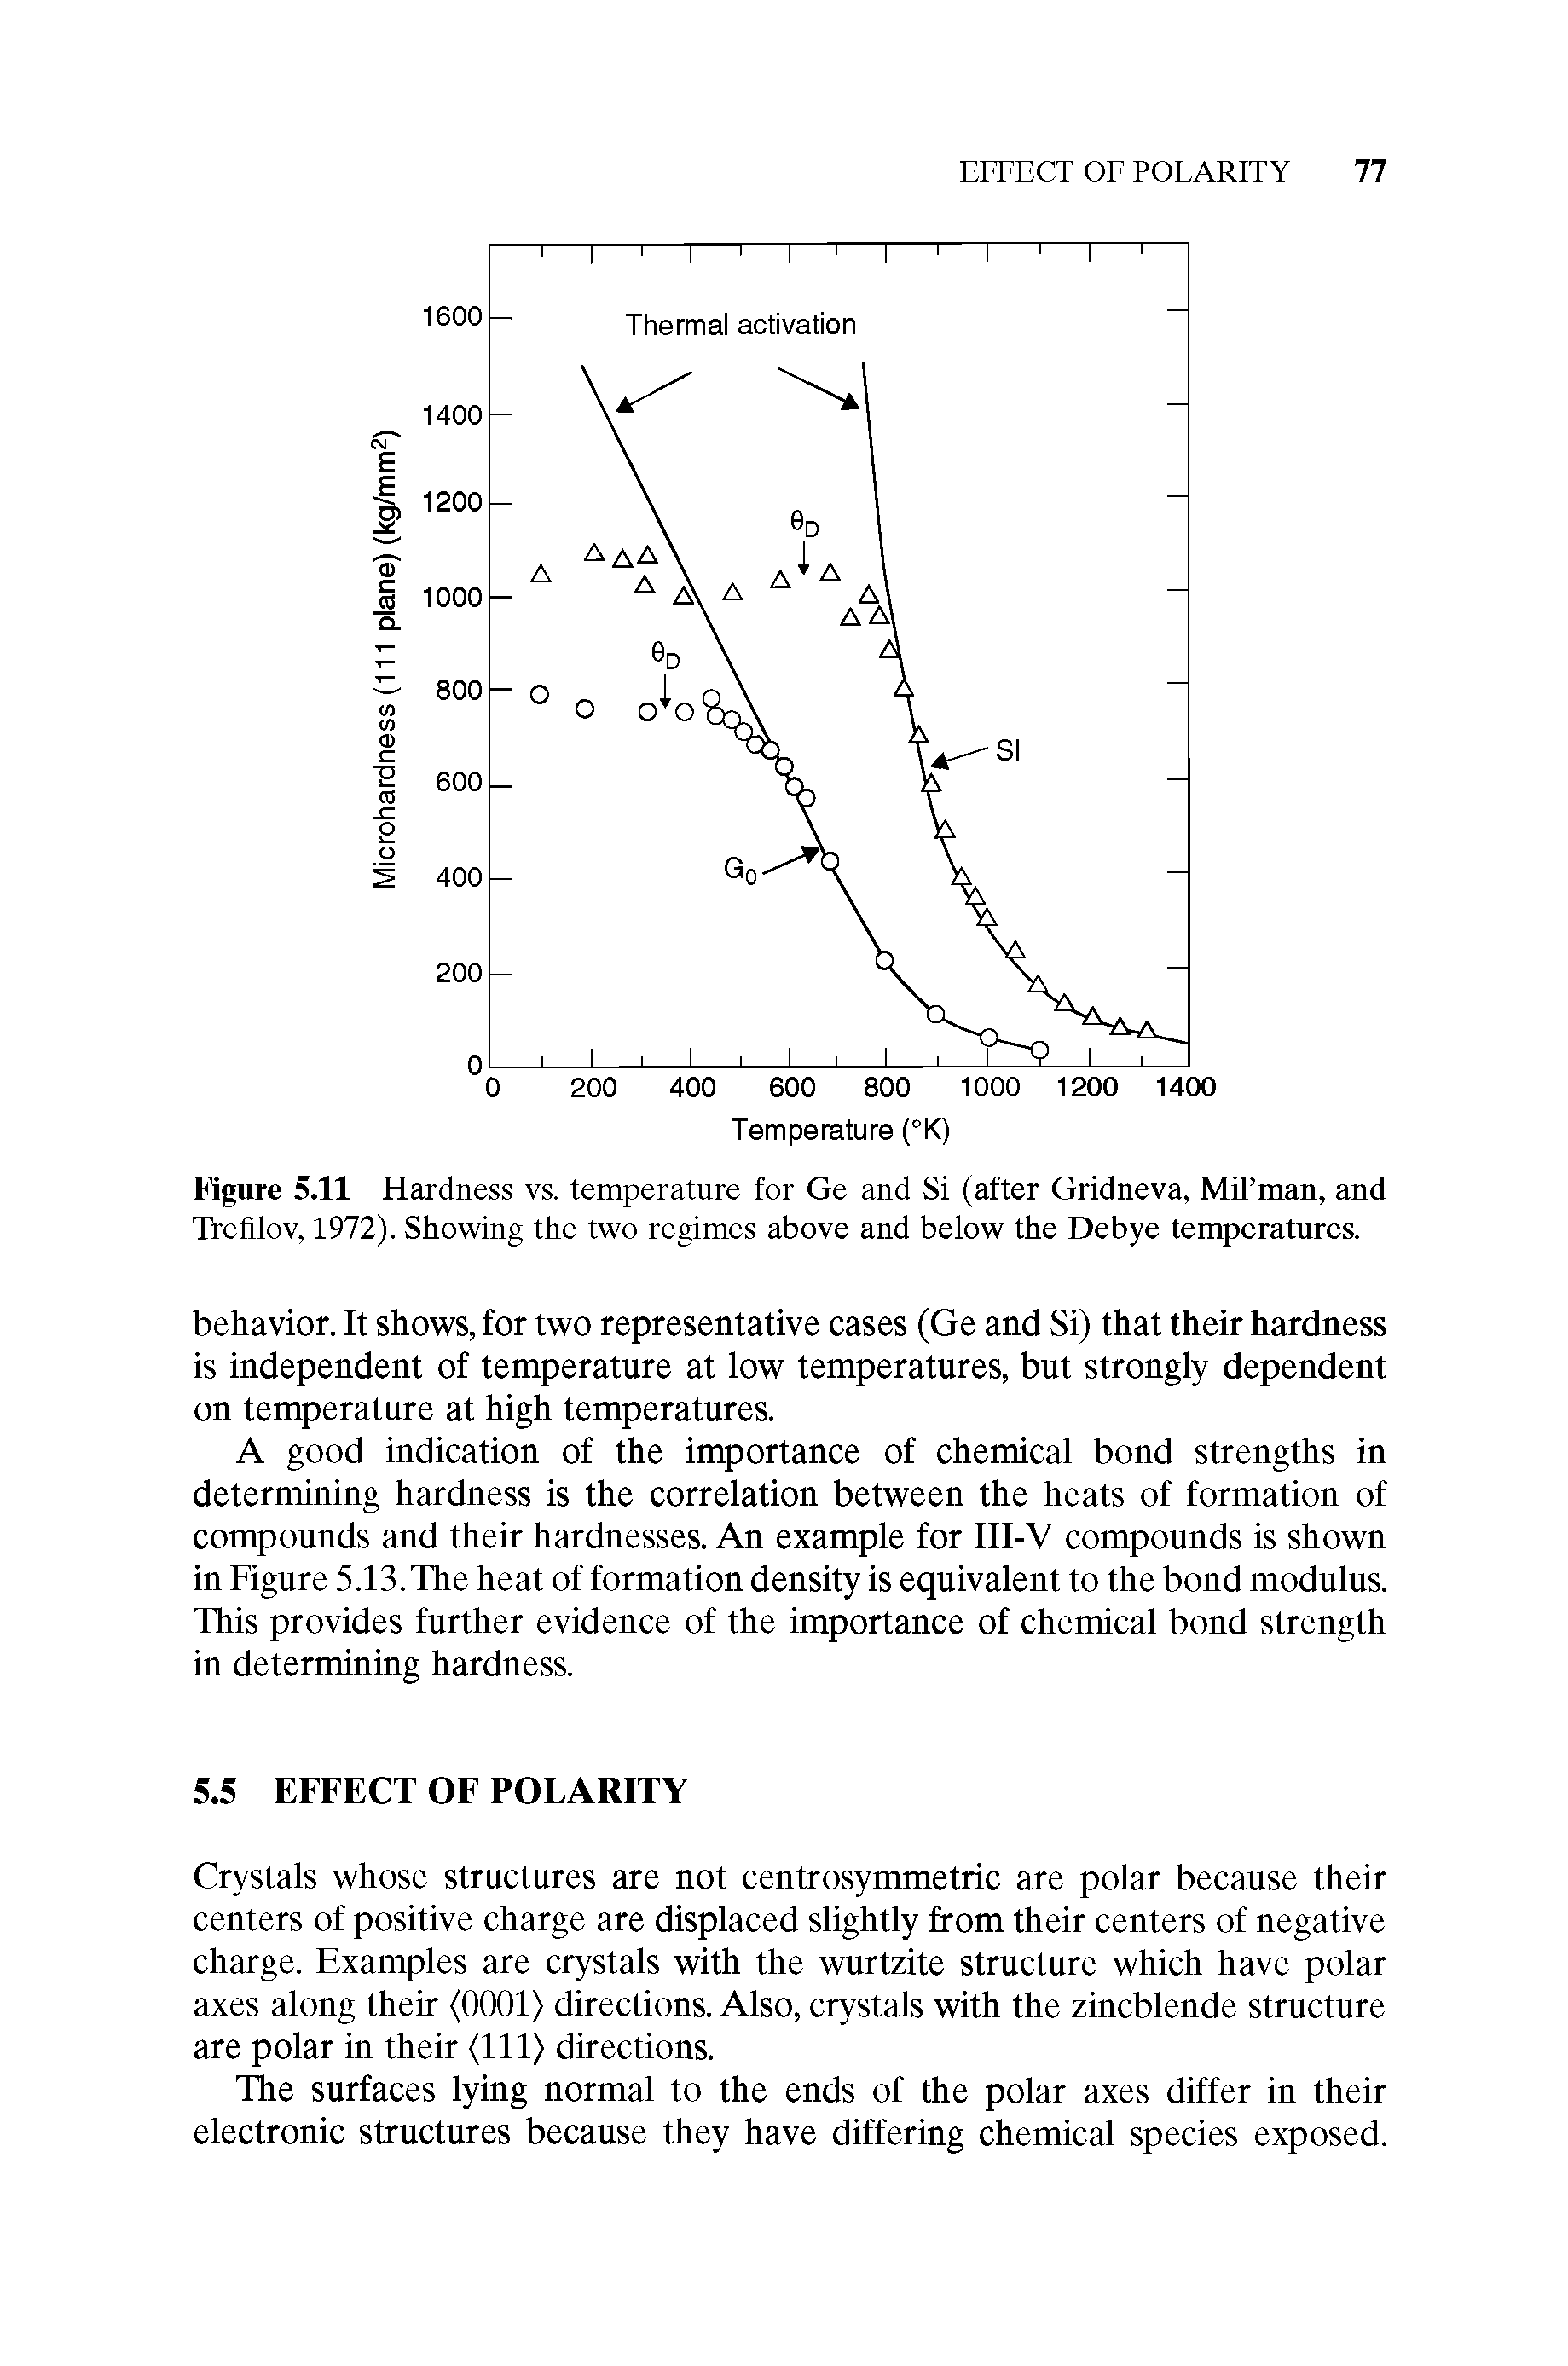 Figure 5.11 Hardness vs. temperature for Ge and Si (after Gridneva, Mil man, and Trefilov, 1972). Showing the two regimes above and below the Debye temperatures.